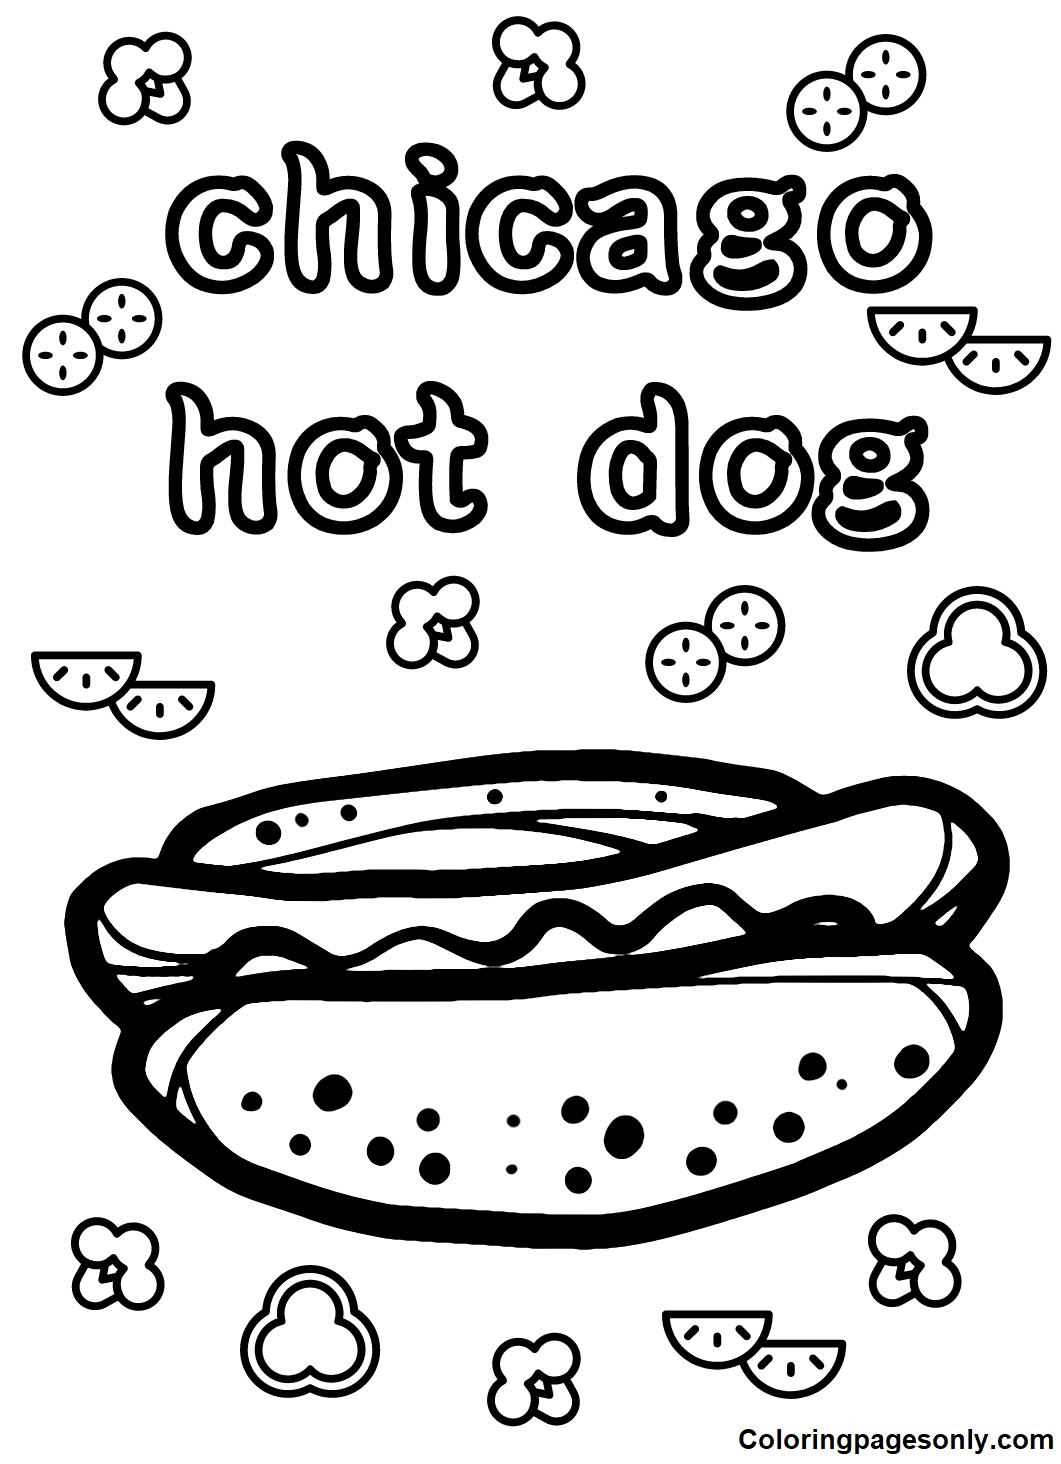 Chicago Hot Dog Coloring Pages